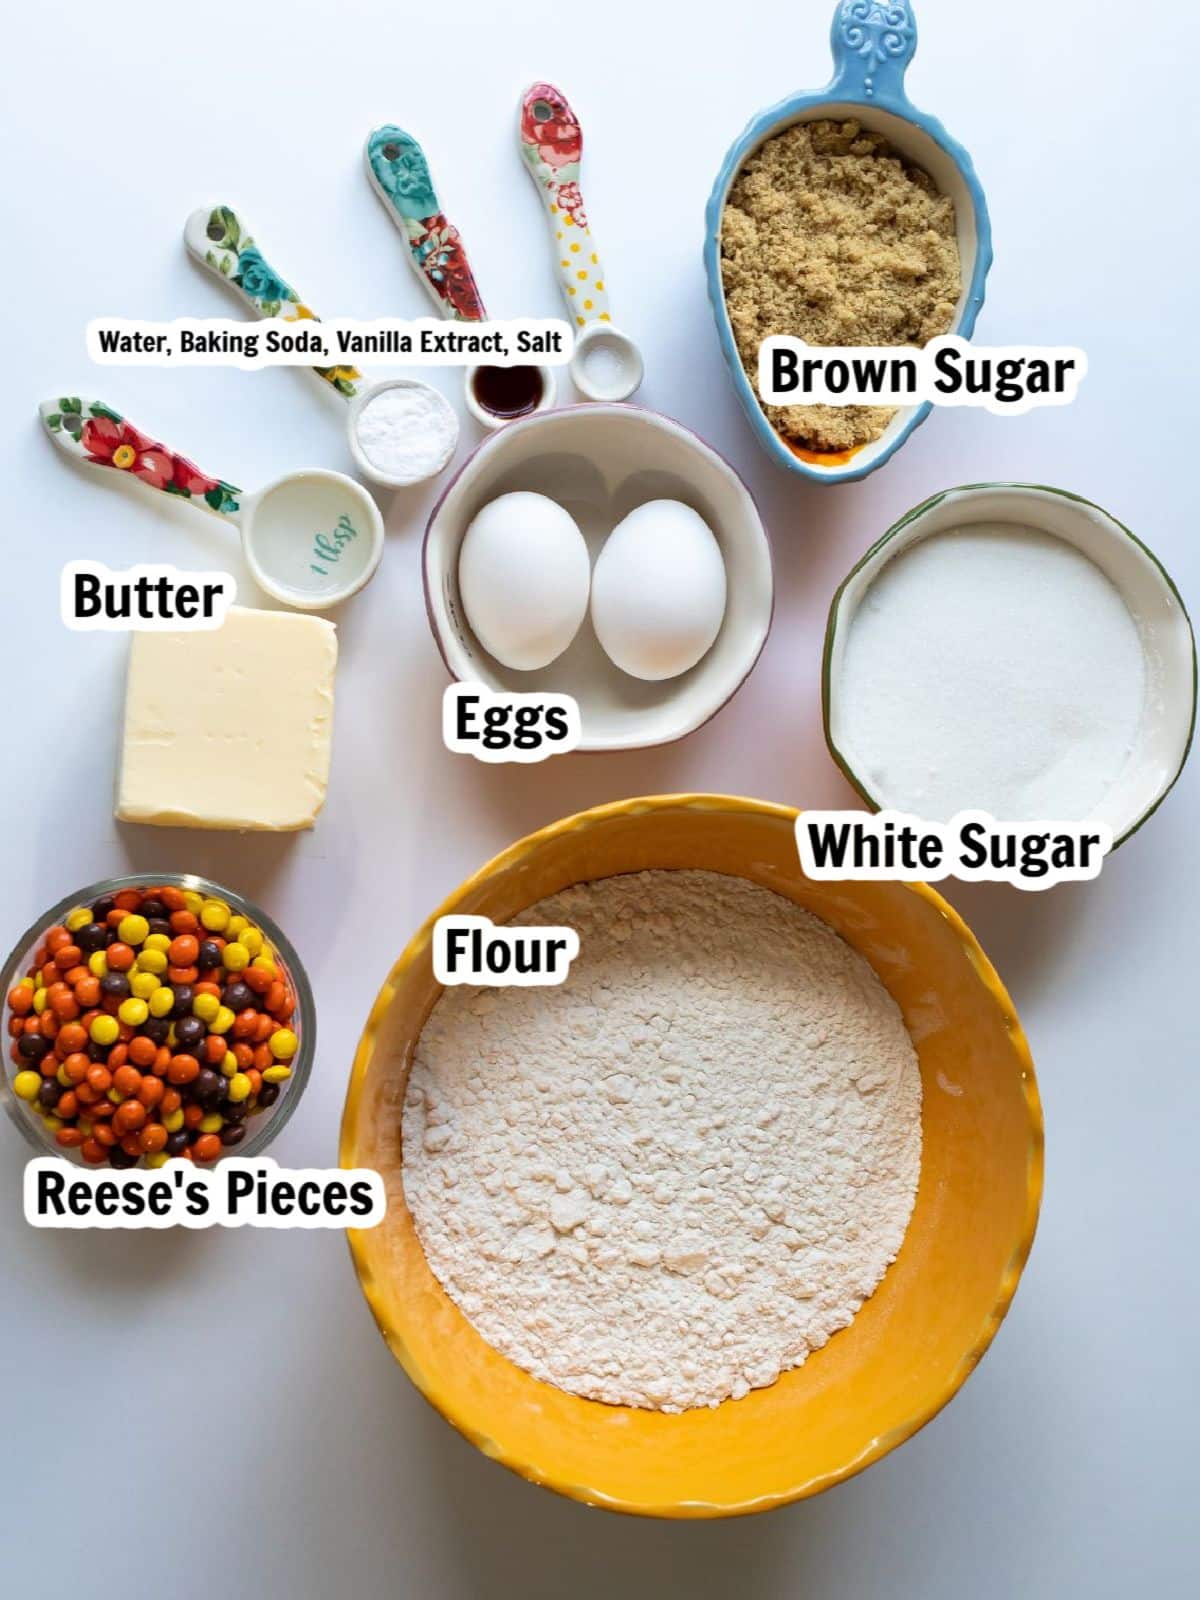 Ingredients for homemade halloween cookies with Reese's Pieces.